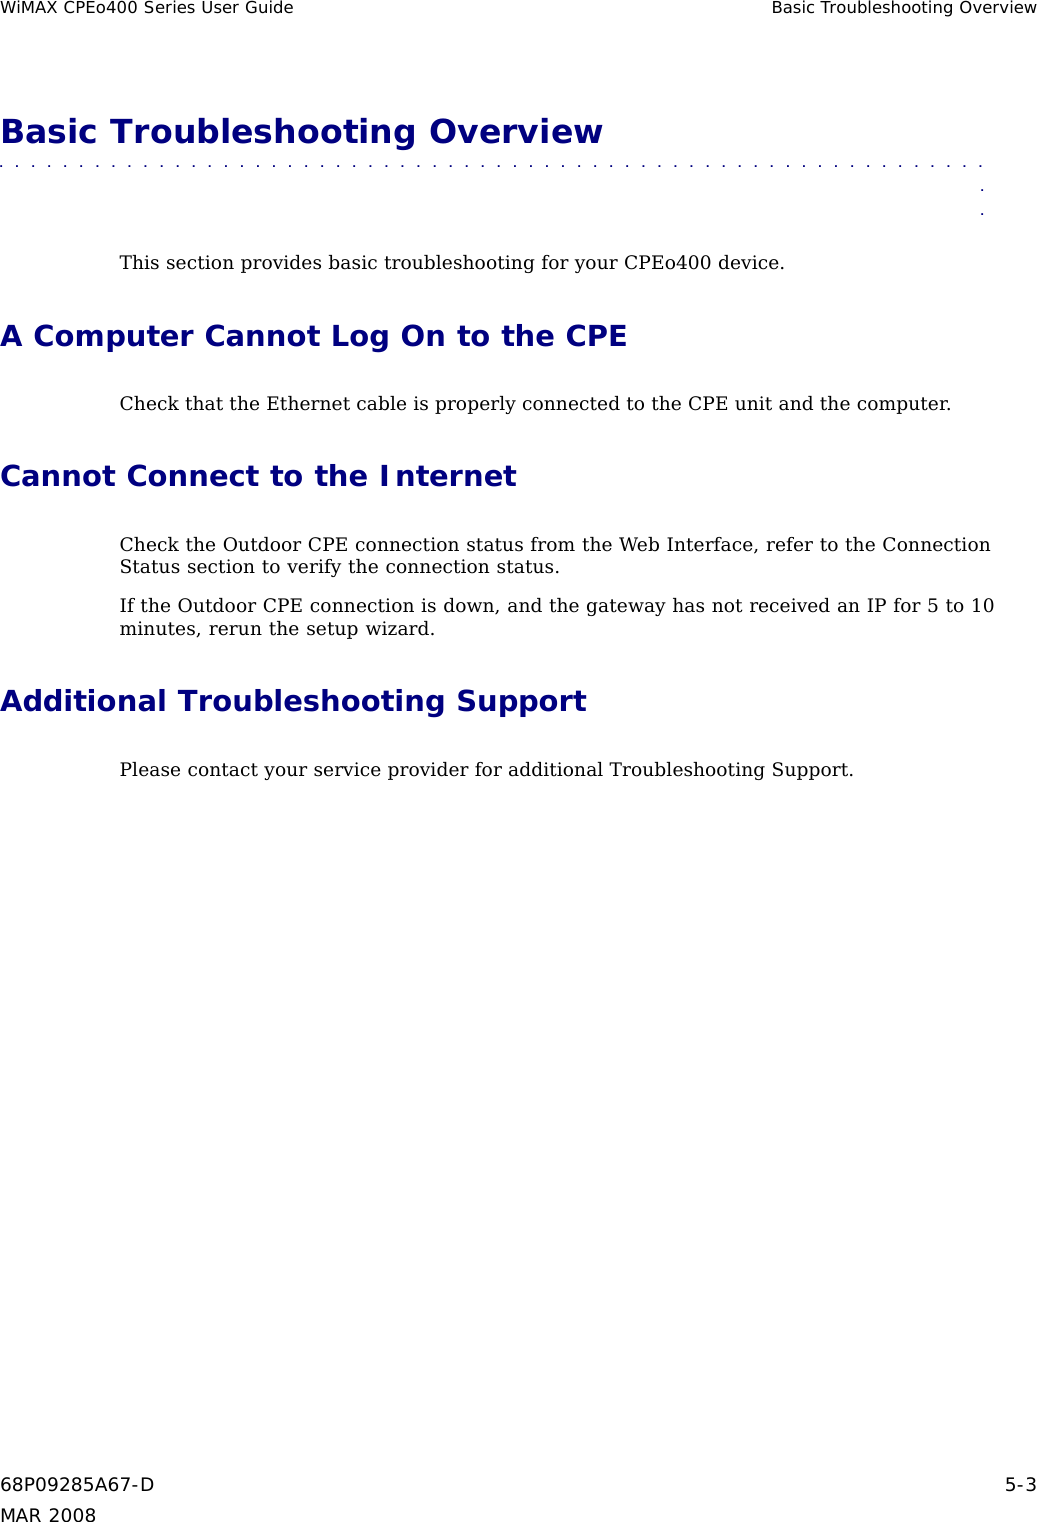 WiMAX CPEo400 Series User Guide Basic Troubleshooting OverviewBasic Troubleshooting Overview■■■■■■■■■■ ■■■■■■■■■■■■■ ■■■■■■■■■■■■■ ■■■■■■■■■■■■■ ■■■■■■■■■■■■■■■This section provides basic troubleshooting for your CPEo400 device.A Computer Cannot Log On to the CPECheck that the Ethernet cable is properly connected to the CPE unit and the computer.Cannot Connect to the InternetCheck the Outdoor CPE connection status from the Web Interface, refer to the ConnectionStatus section to verify the connection status.If the Outdoor CPE connection is down, and the gateway has not received an IP for 5 to 10minutes, rerun the setup wizard.Additional Troubleshooting SupportPlease contact your service provider for additional Troubleshooting Support.68P09285A67-D 5-3MAR 2008